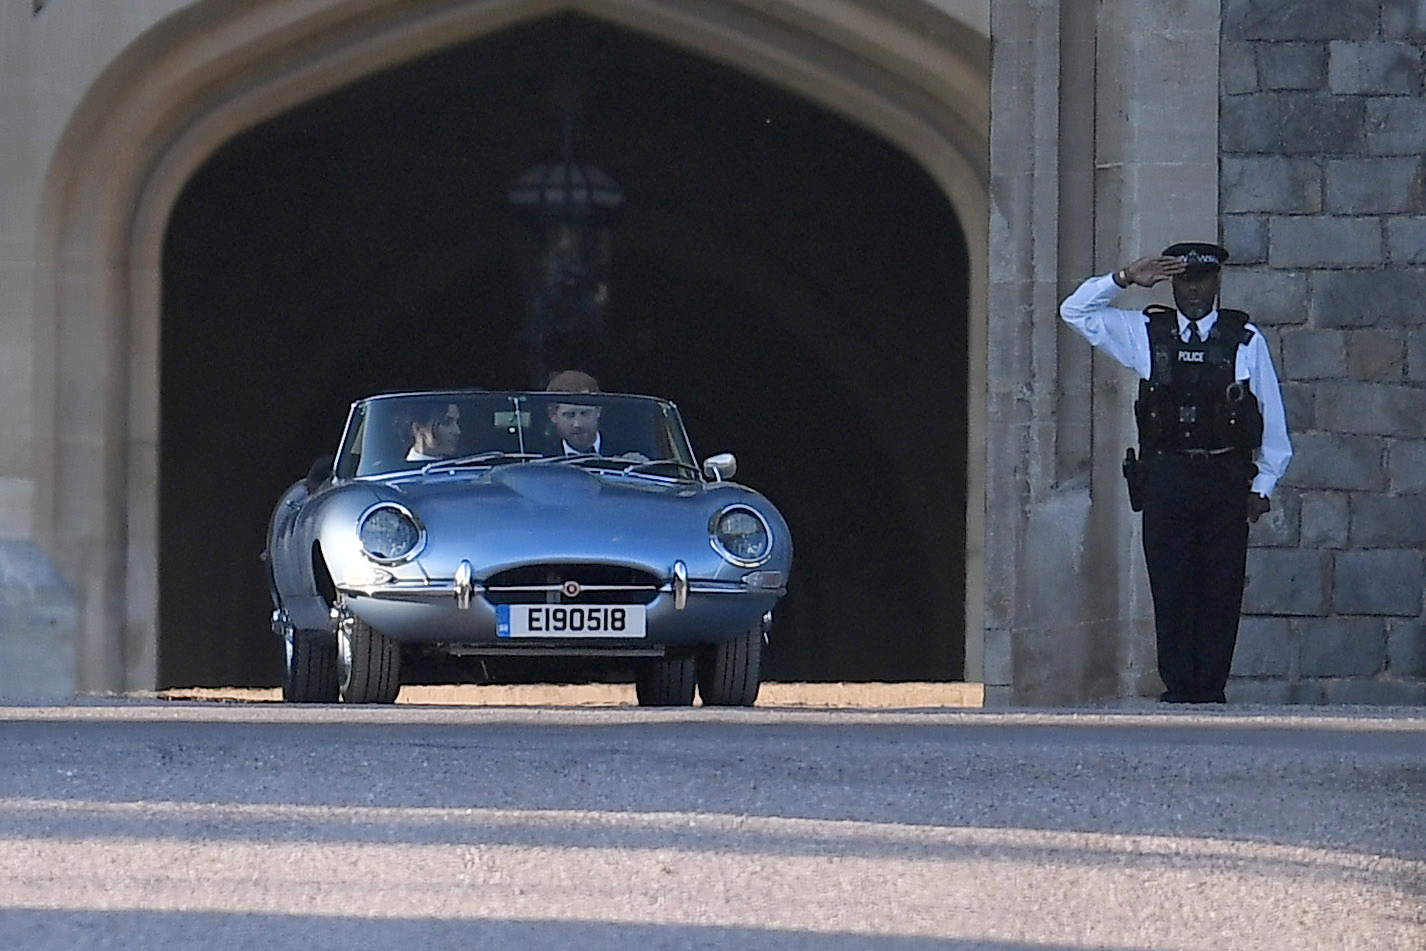 PHOTO: The newly married Duke and Duchess of Sussex, Prince Harry and Meghan Markle, leave Windsor Castle in a convertible car after their wedding in Windsor, England, to attend an evening reception at Frogmore House, May 19, 2018. 